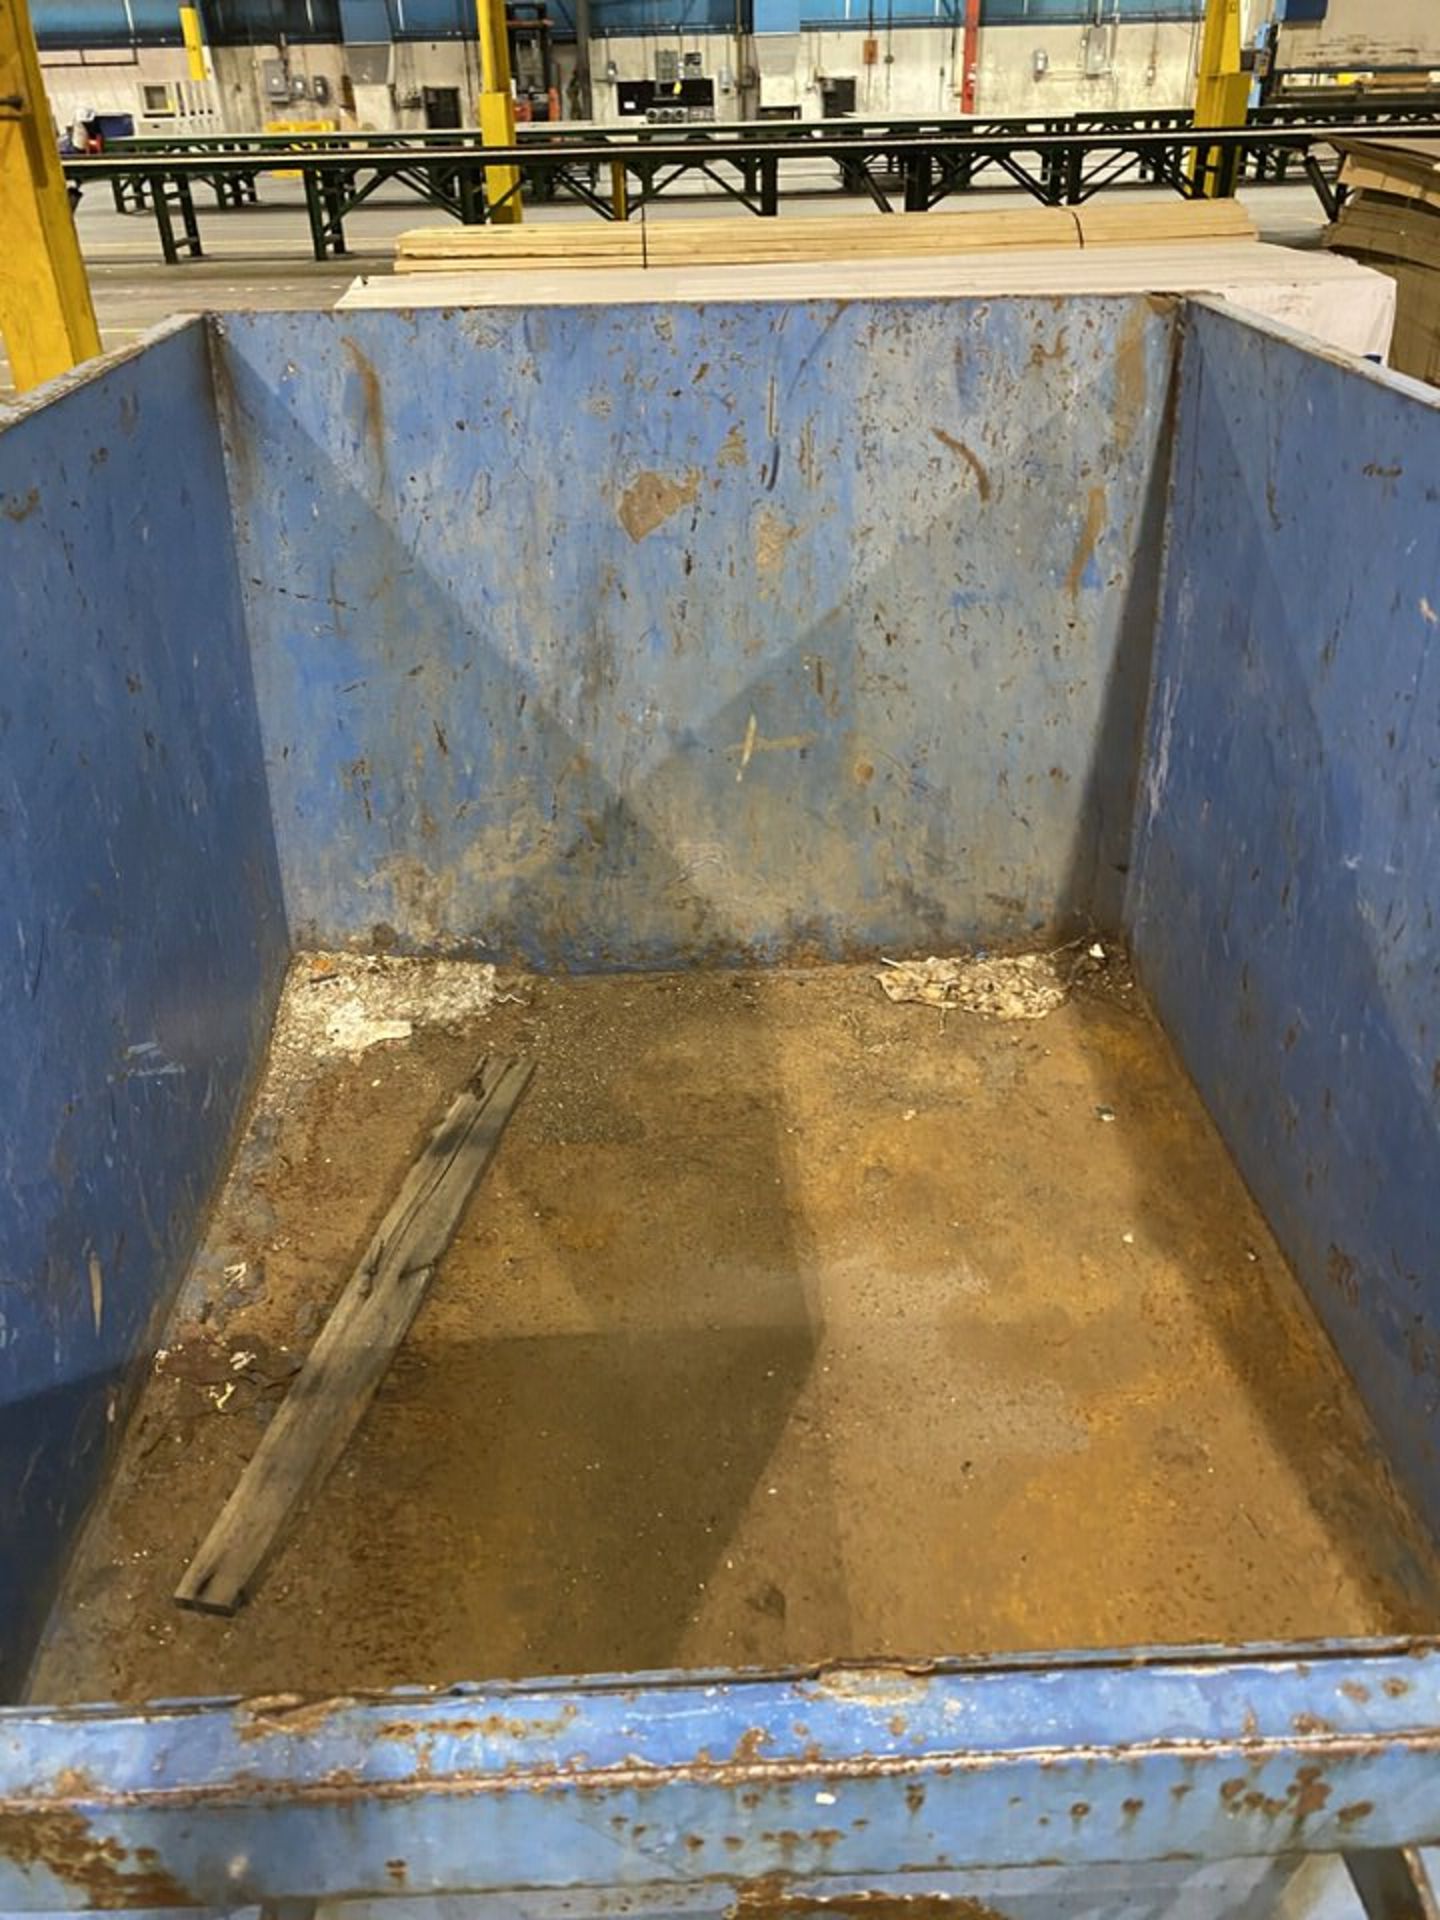 Blue Material Tug Cart on Casters (LOCATION: 1400 WESTPARK WAY, EULESS TX 75856) - Image 2 of 2